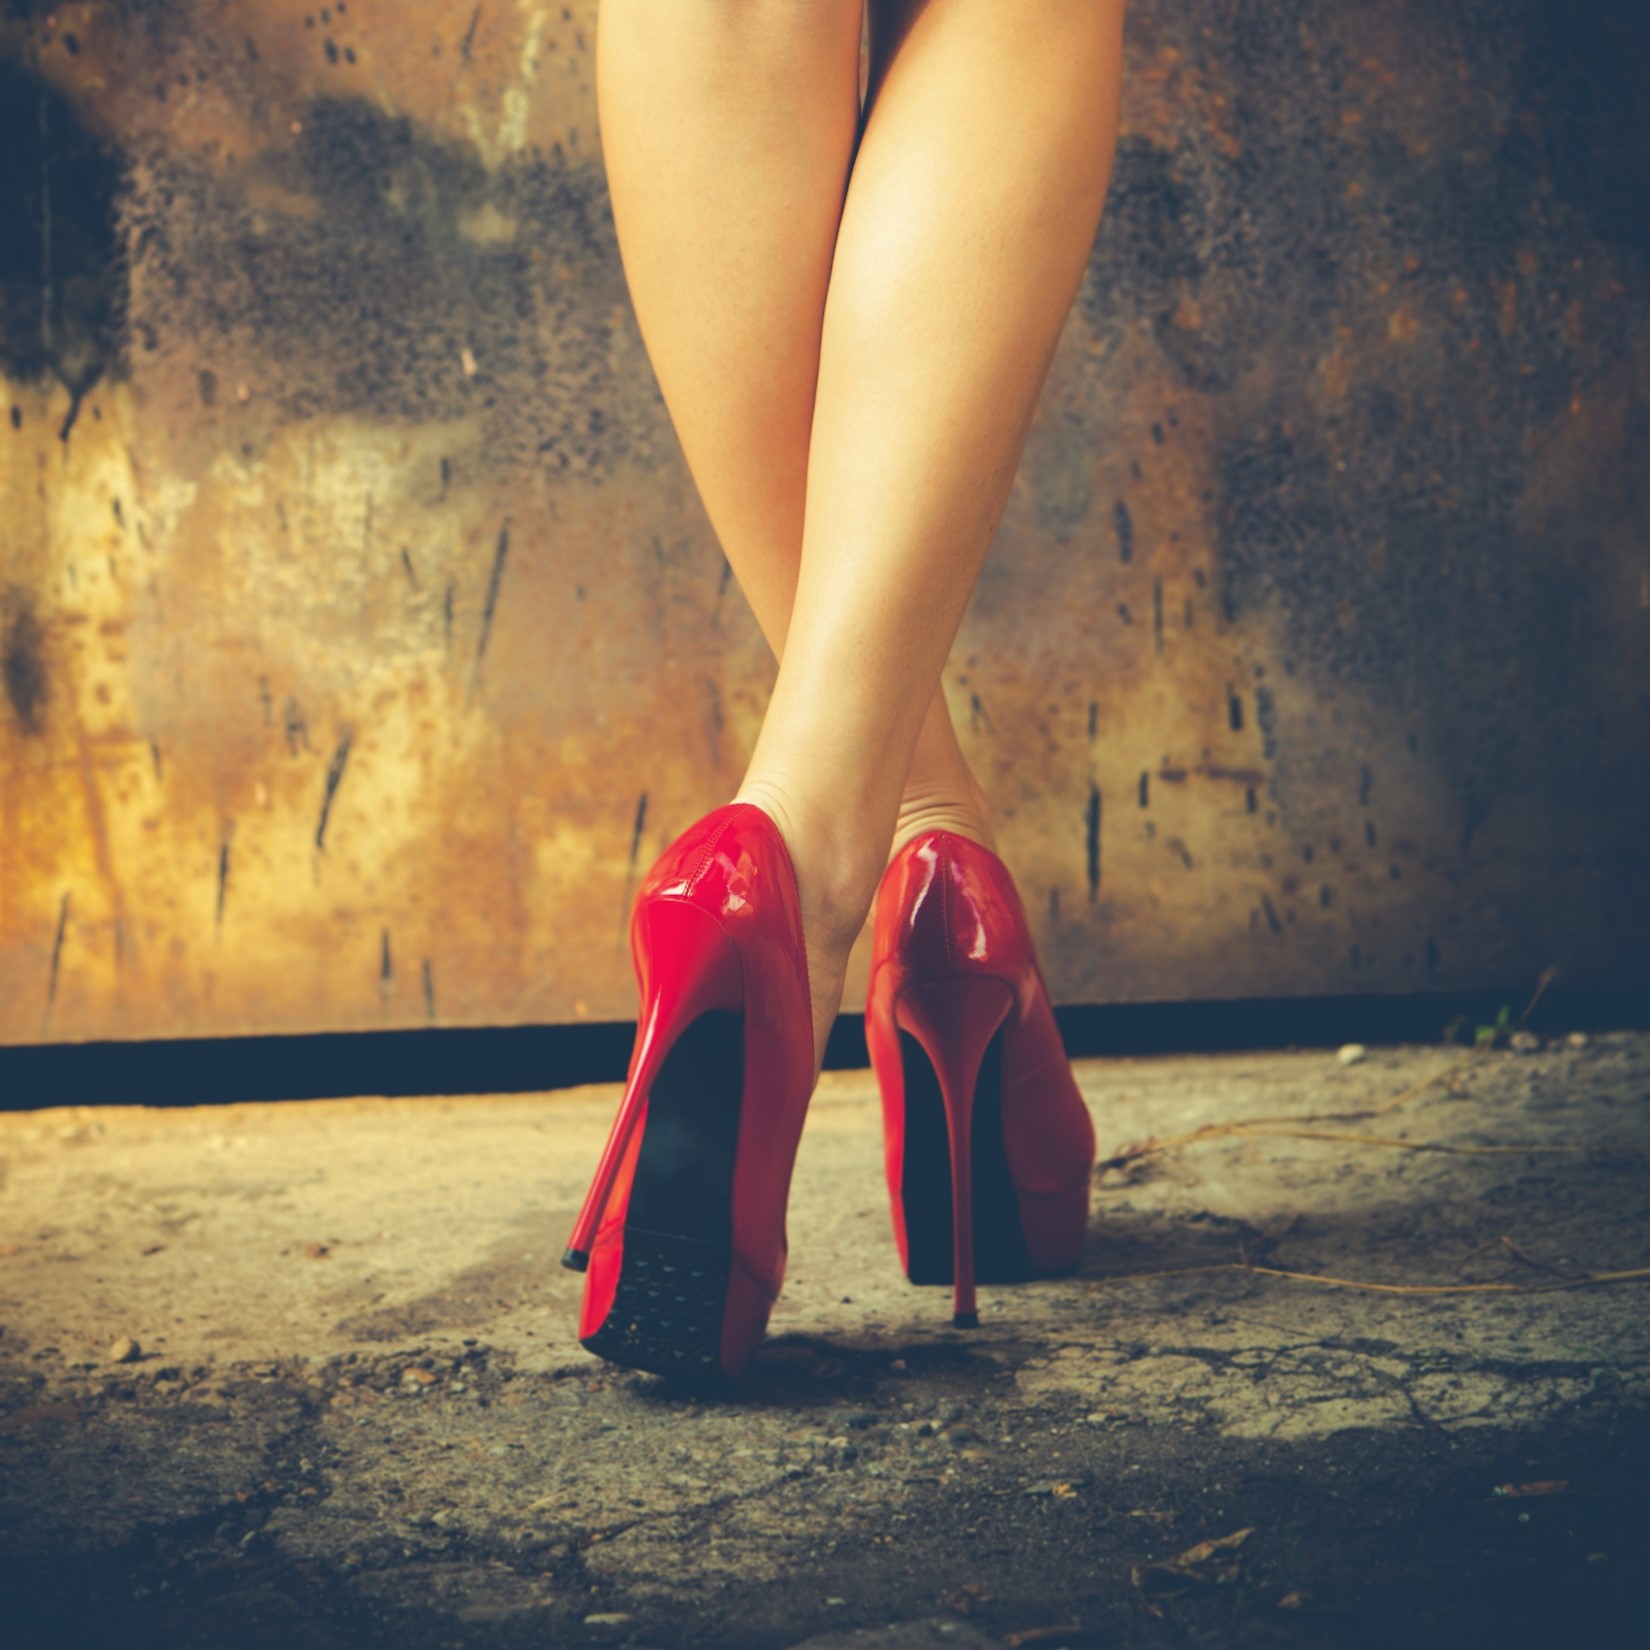 High heels footwear market to rise 1.35% annually 